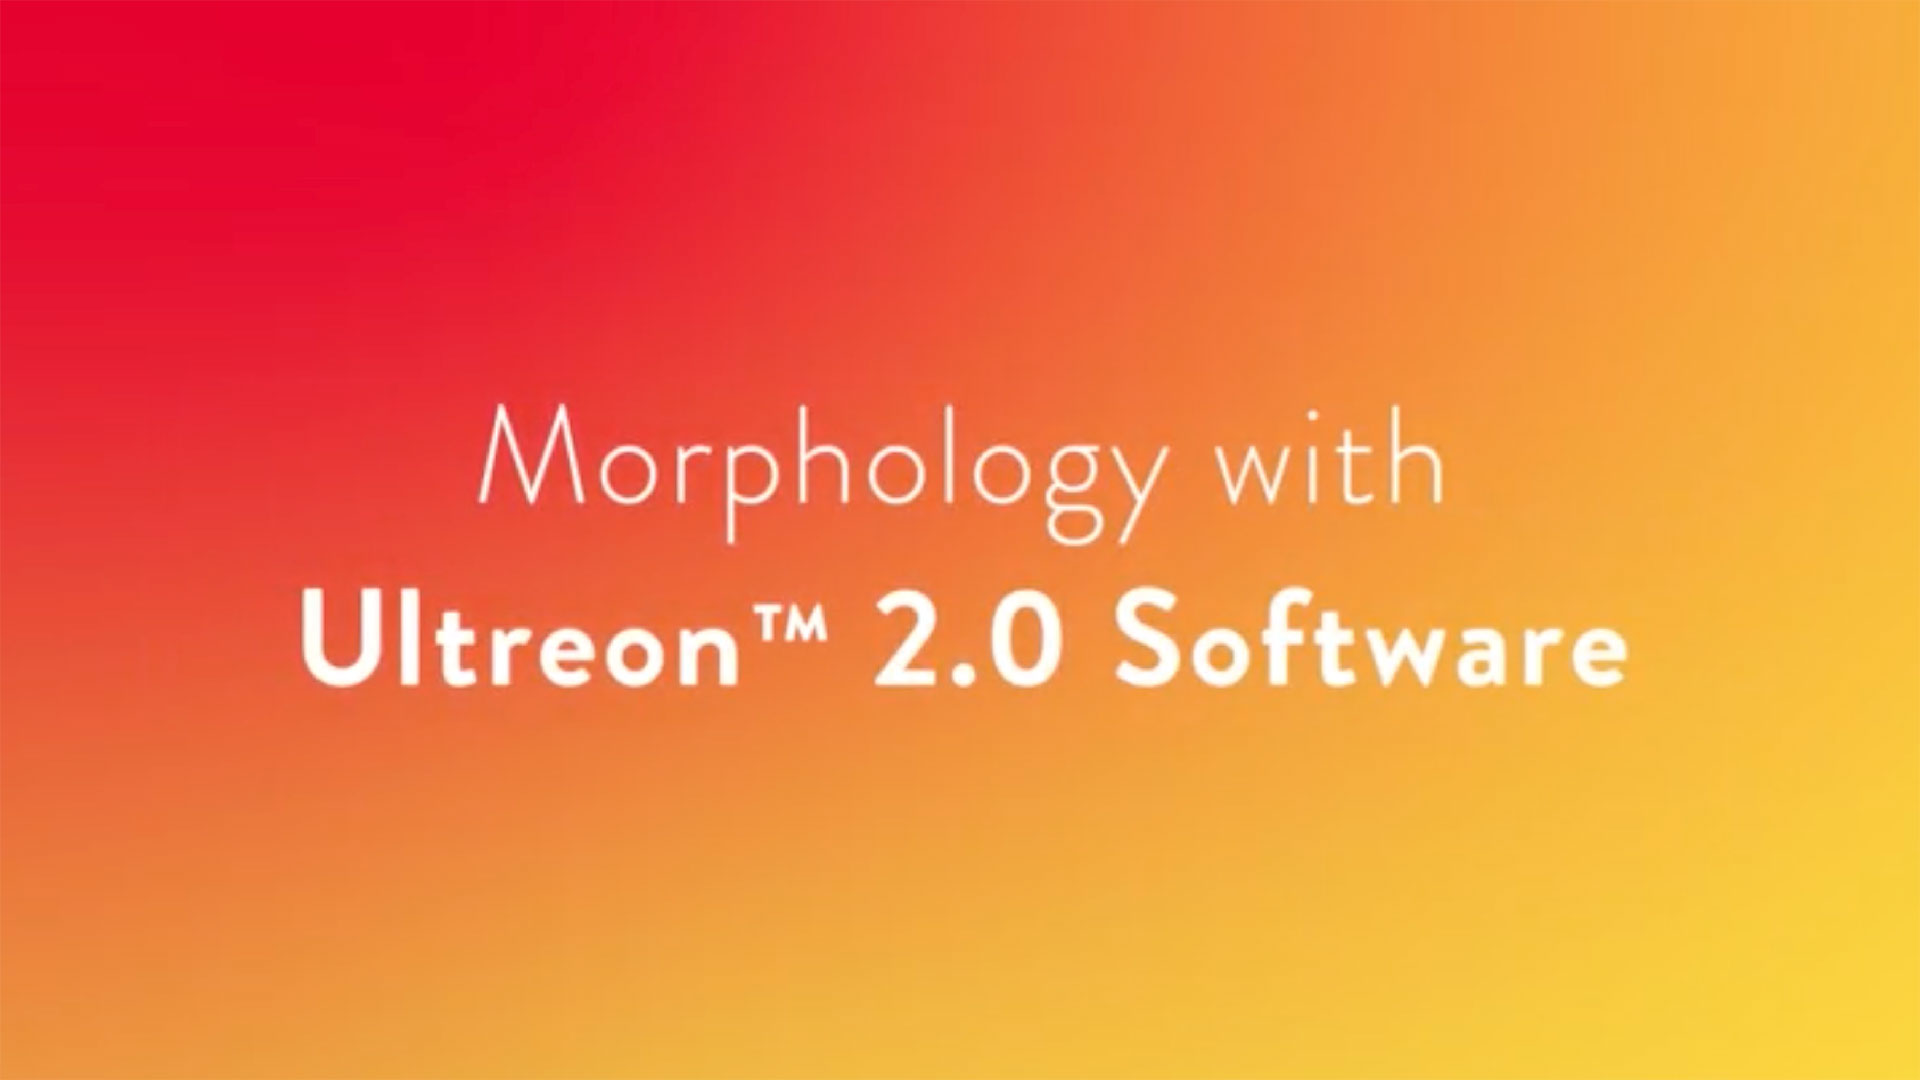 Morphology with Ultreon 2.0 Software